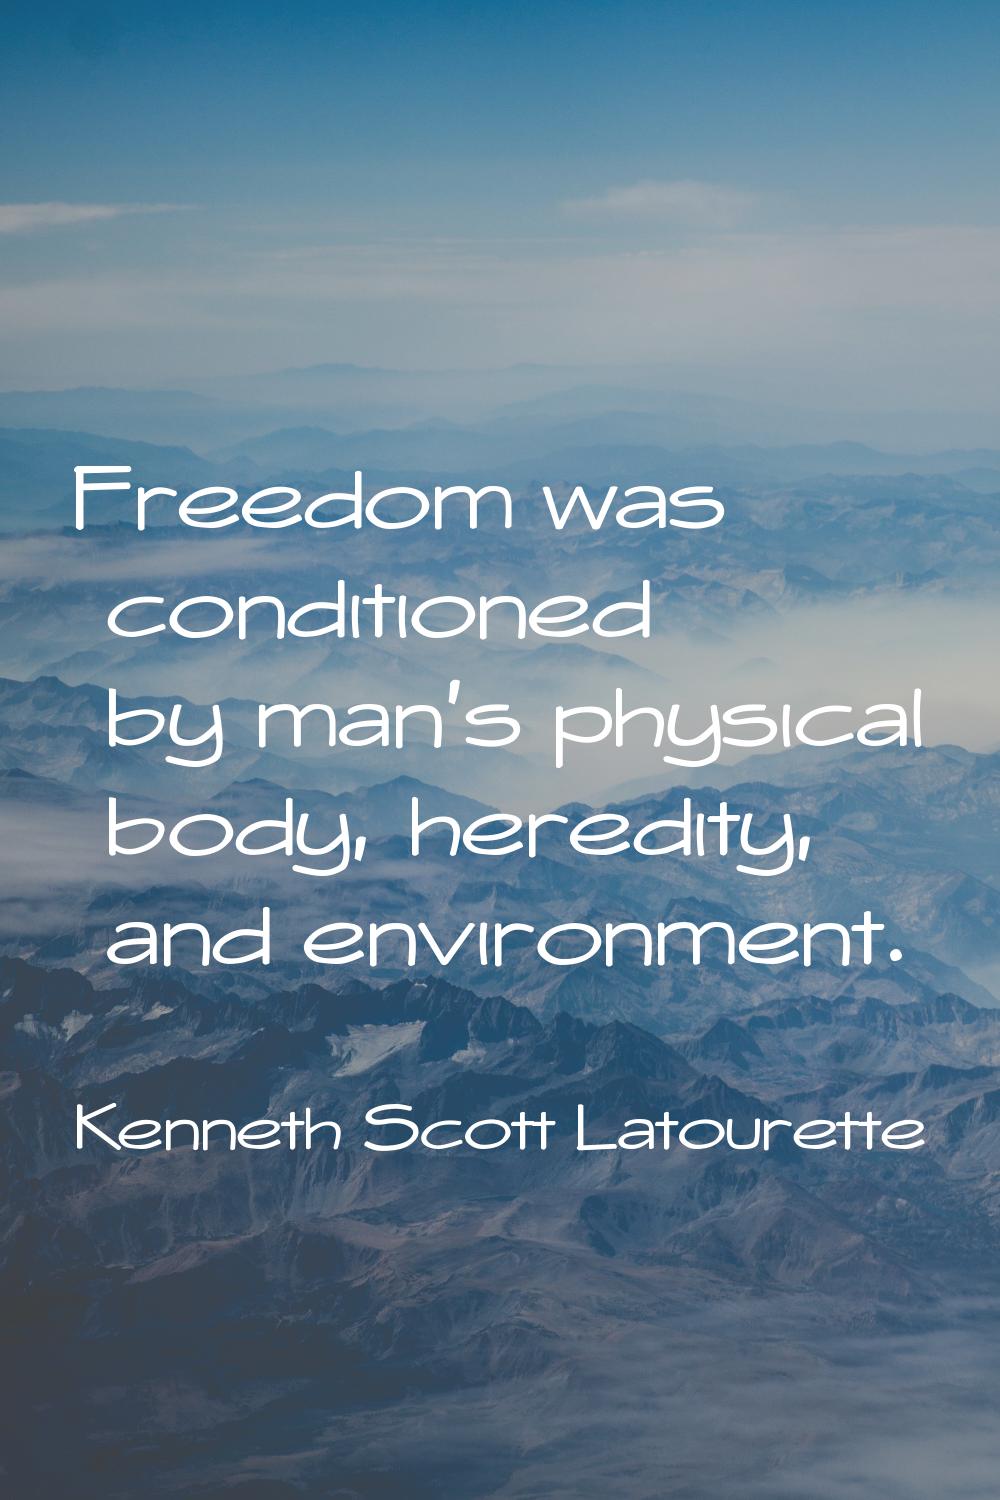 Freedom was conditioned by man's physical body, heredity, and environment.